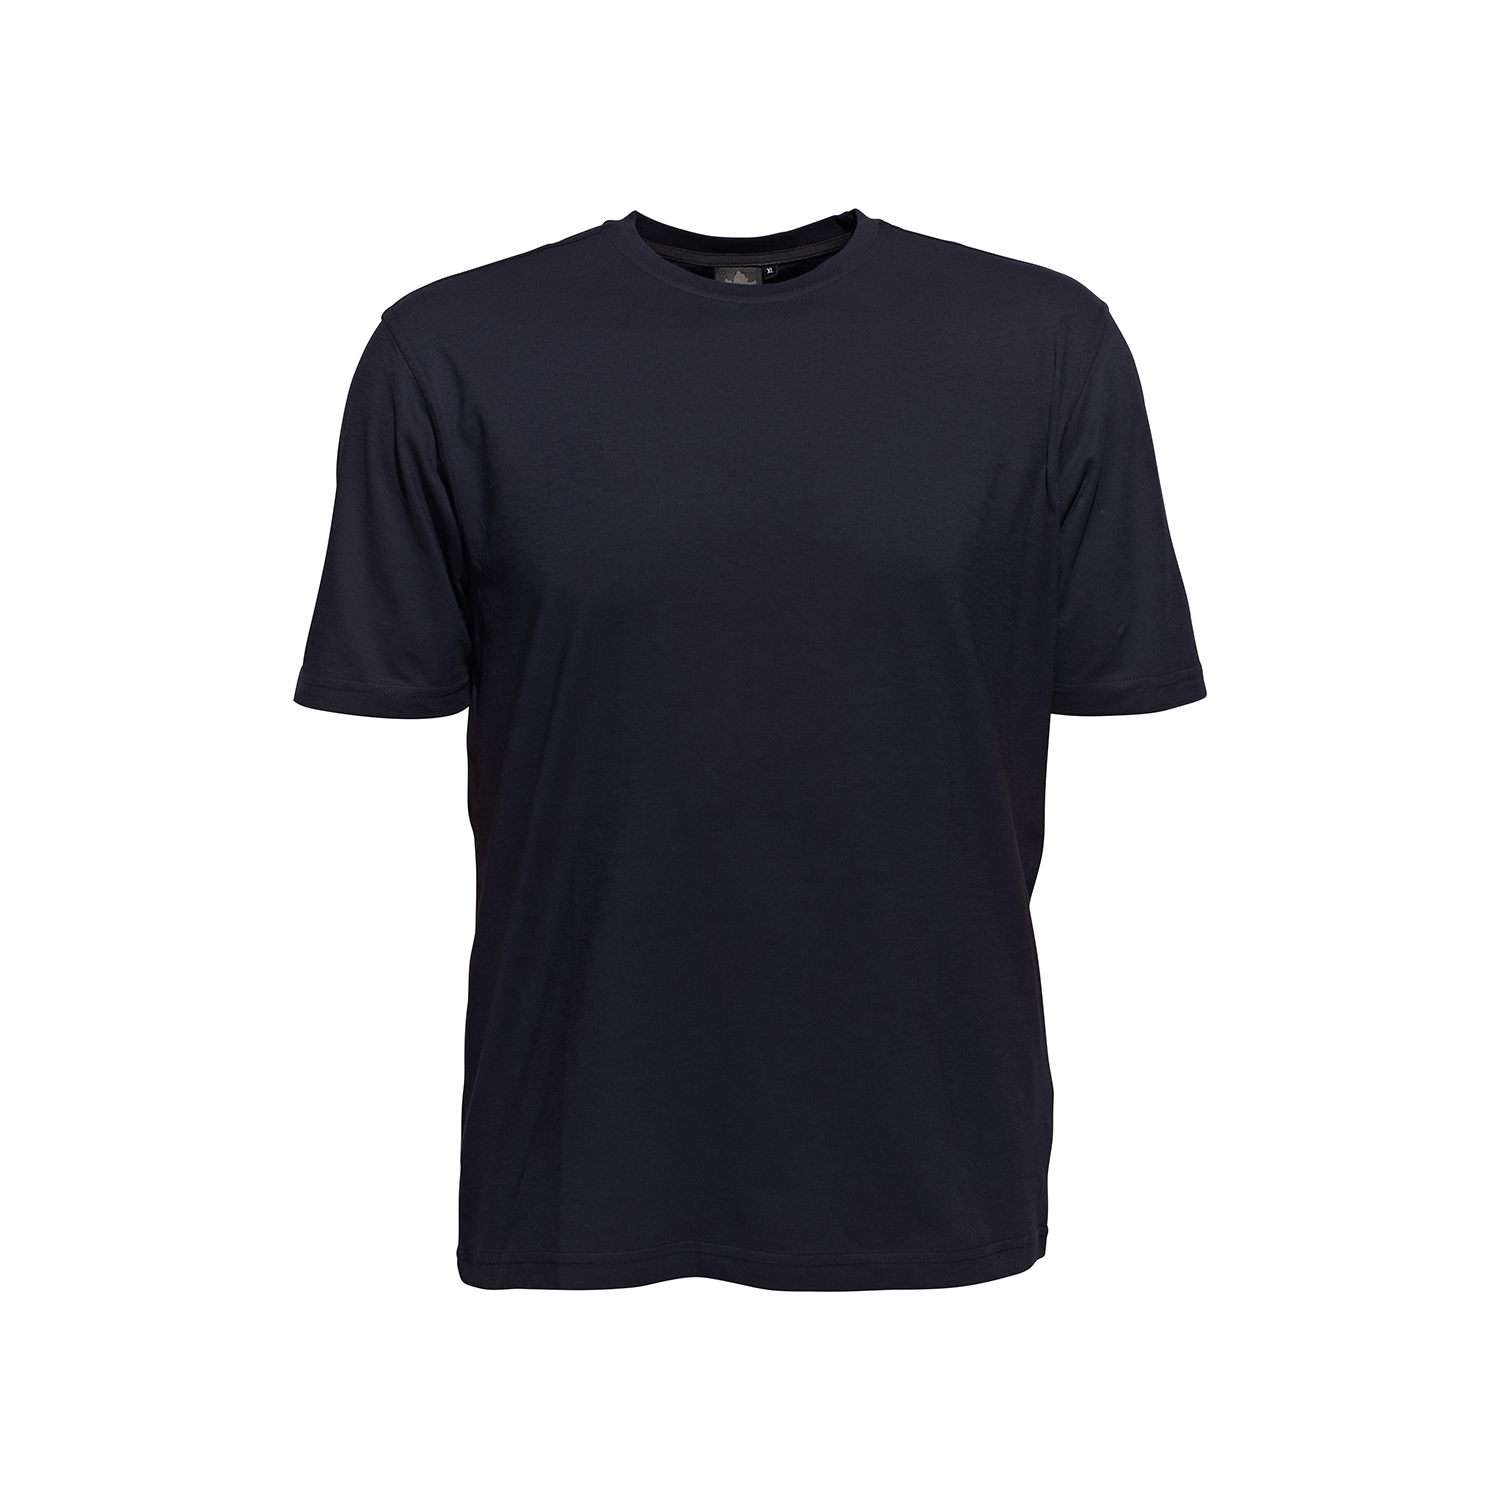 T-shirt for men in dark blue by Ahorn Sportswear up to oversize 10XL